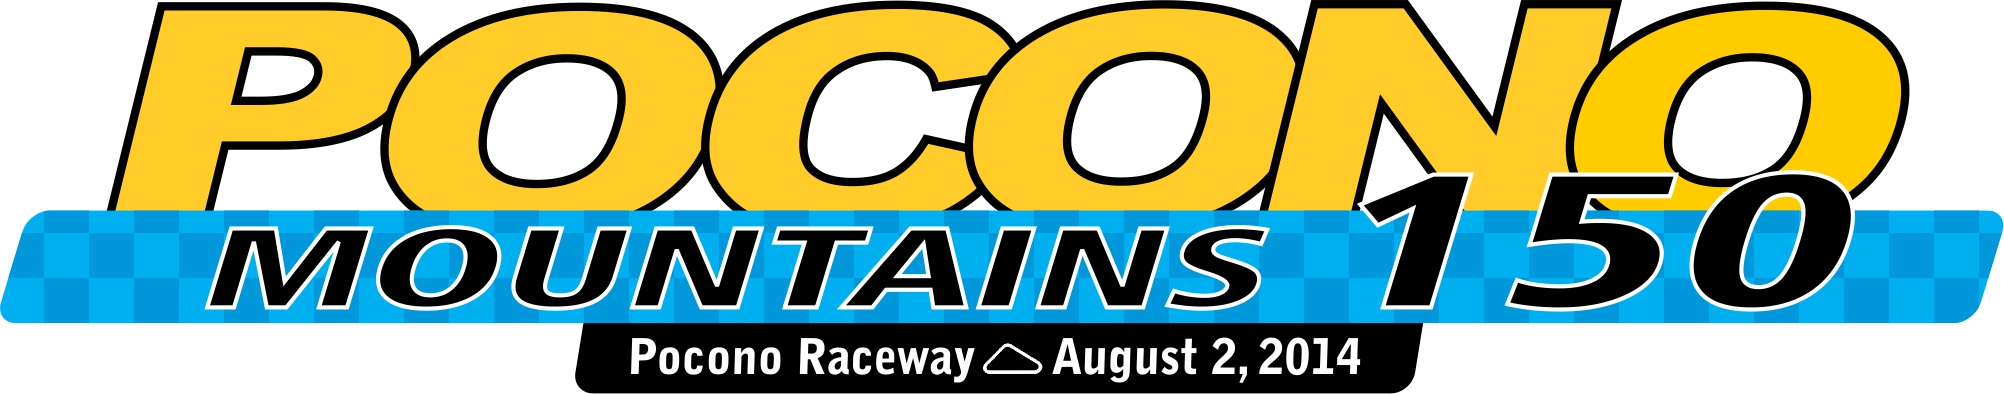 Truck Series at Pocono: Starting lineup, green flag and tv info for Pocono Mountains 150